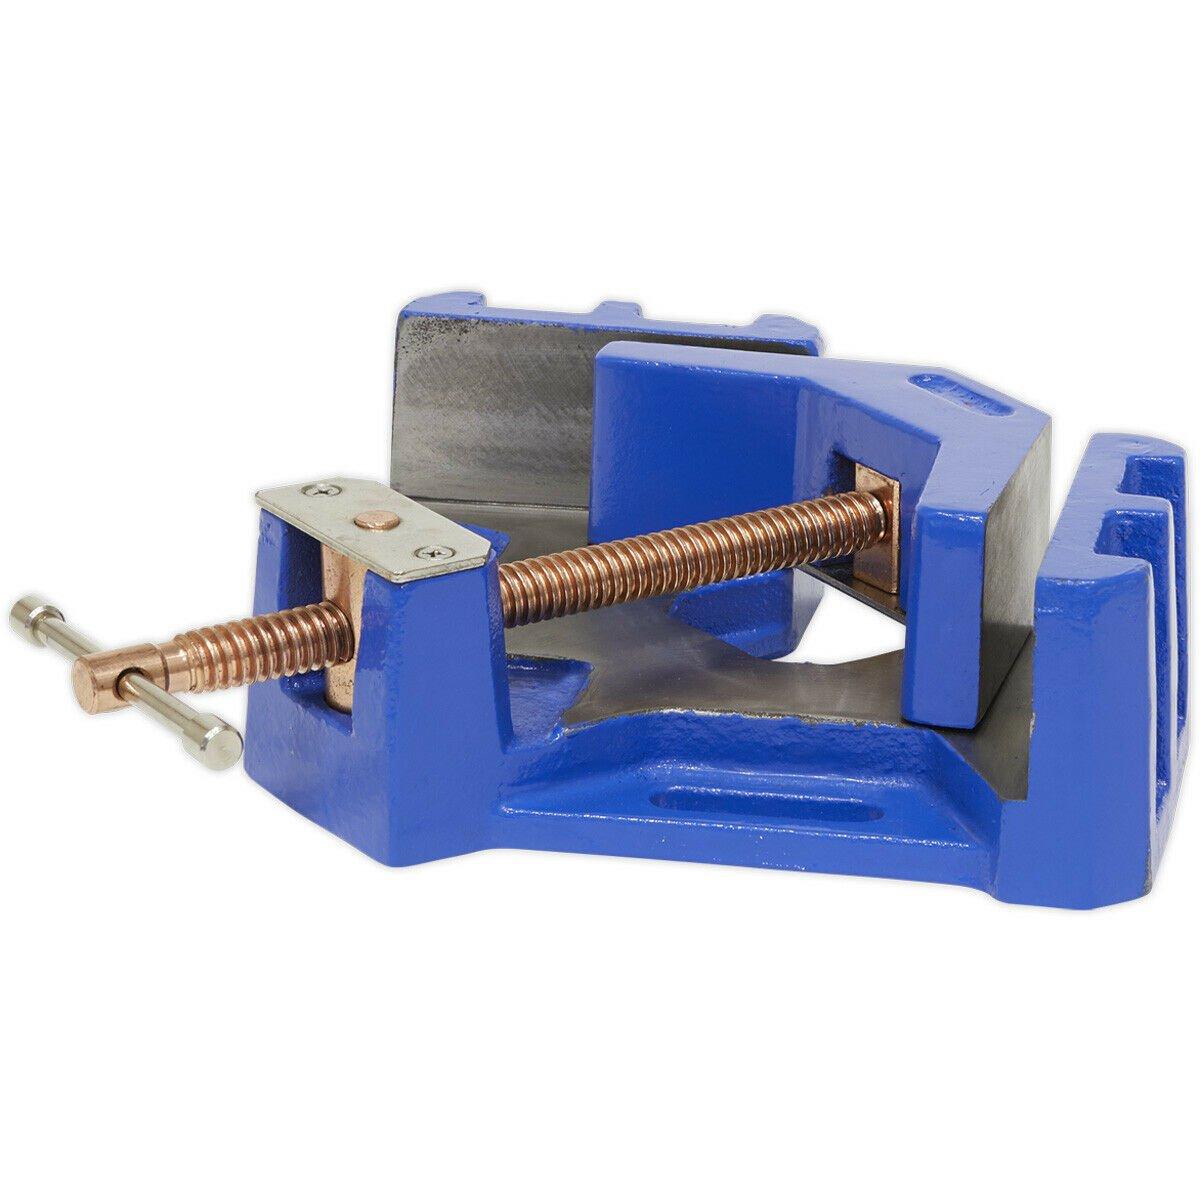 215mm Welding Vice - Self-Centring Swivel Jaw - 90 Degree Angle Welding Aid